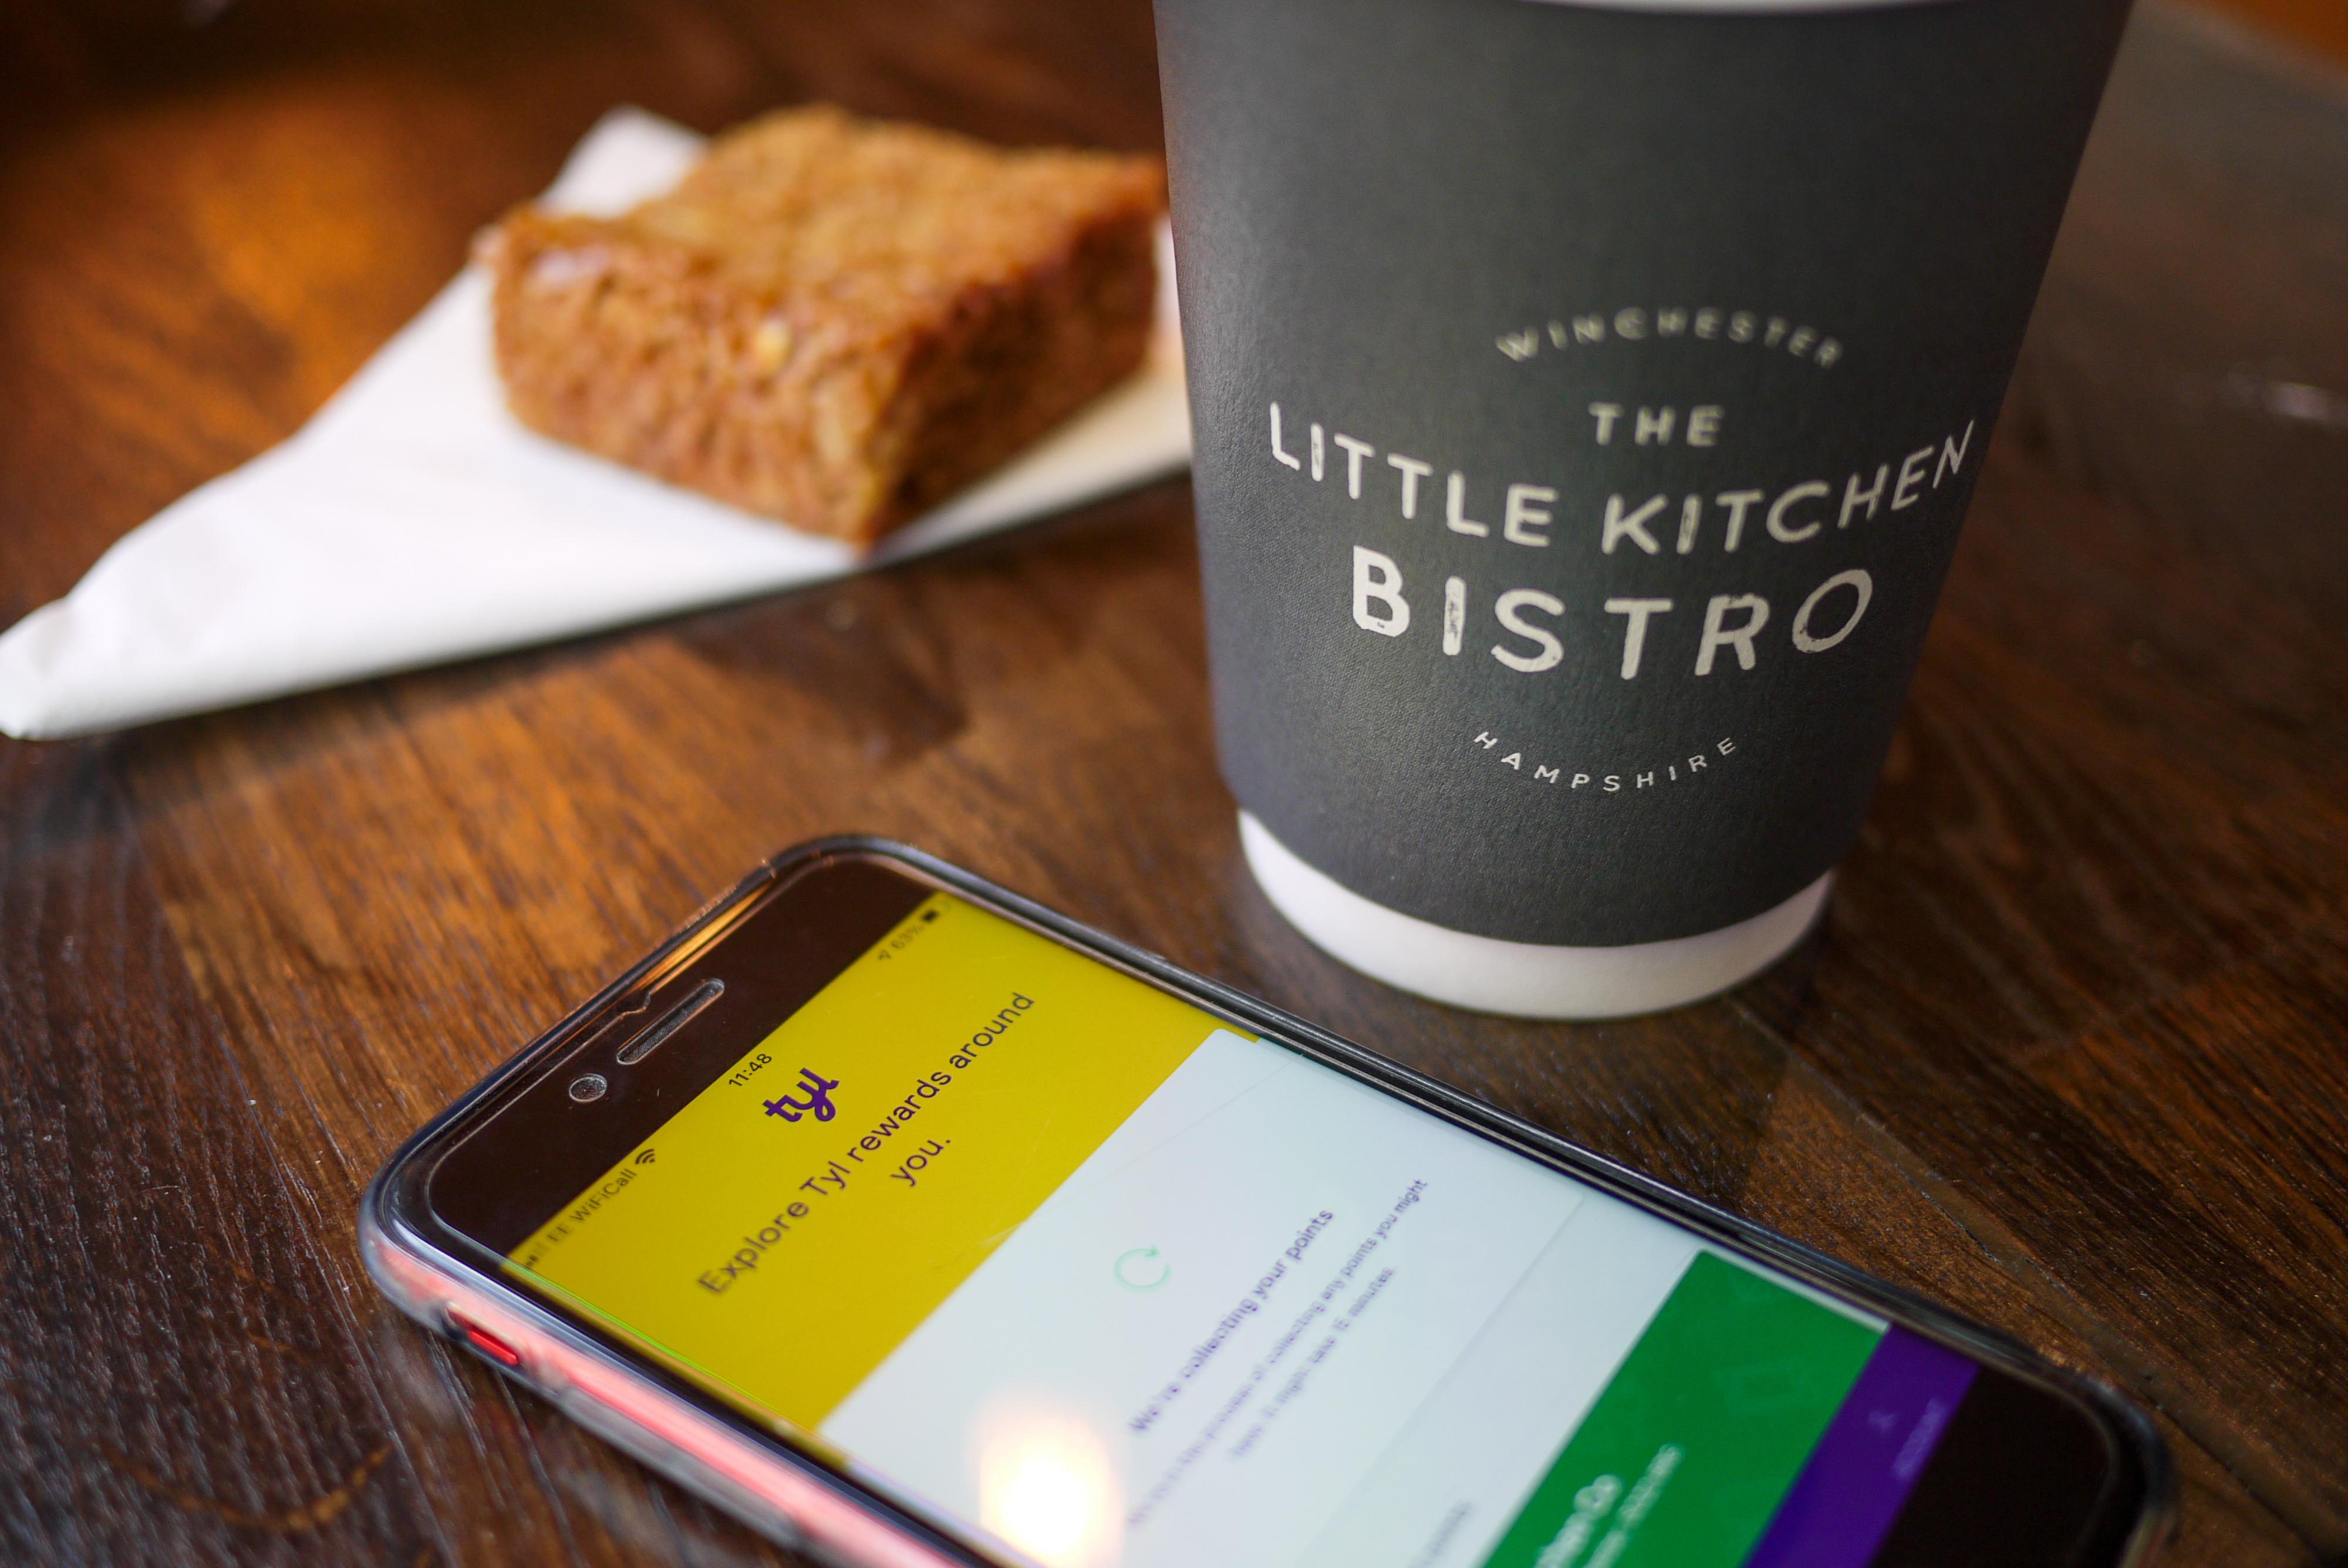 Tyl by NatWest launches loyalty app to encourage support of local businesses as lockdown lifts